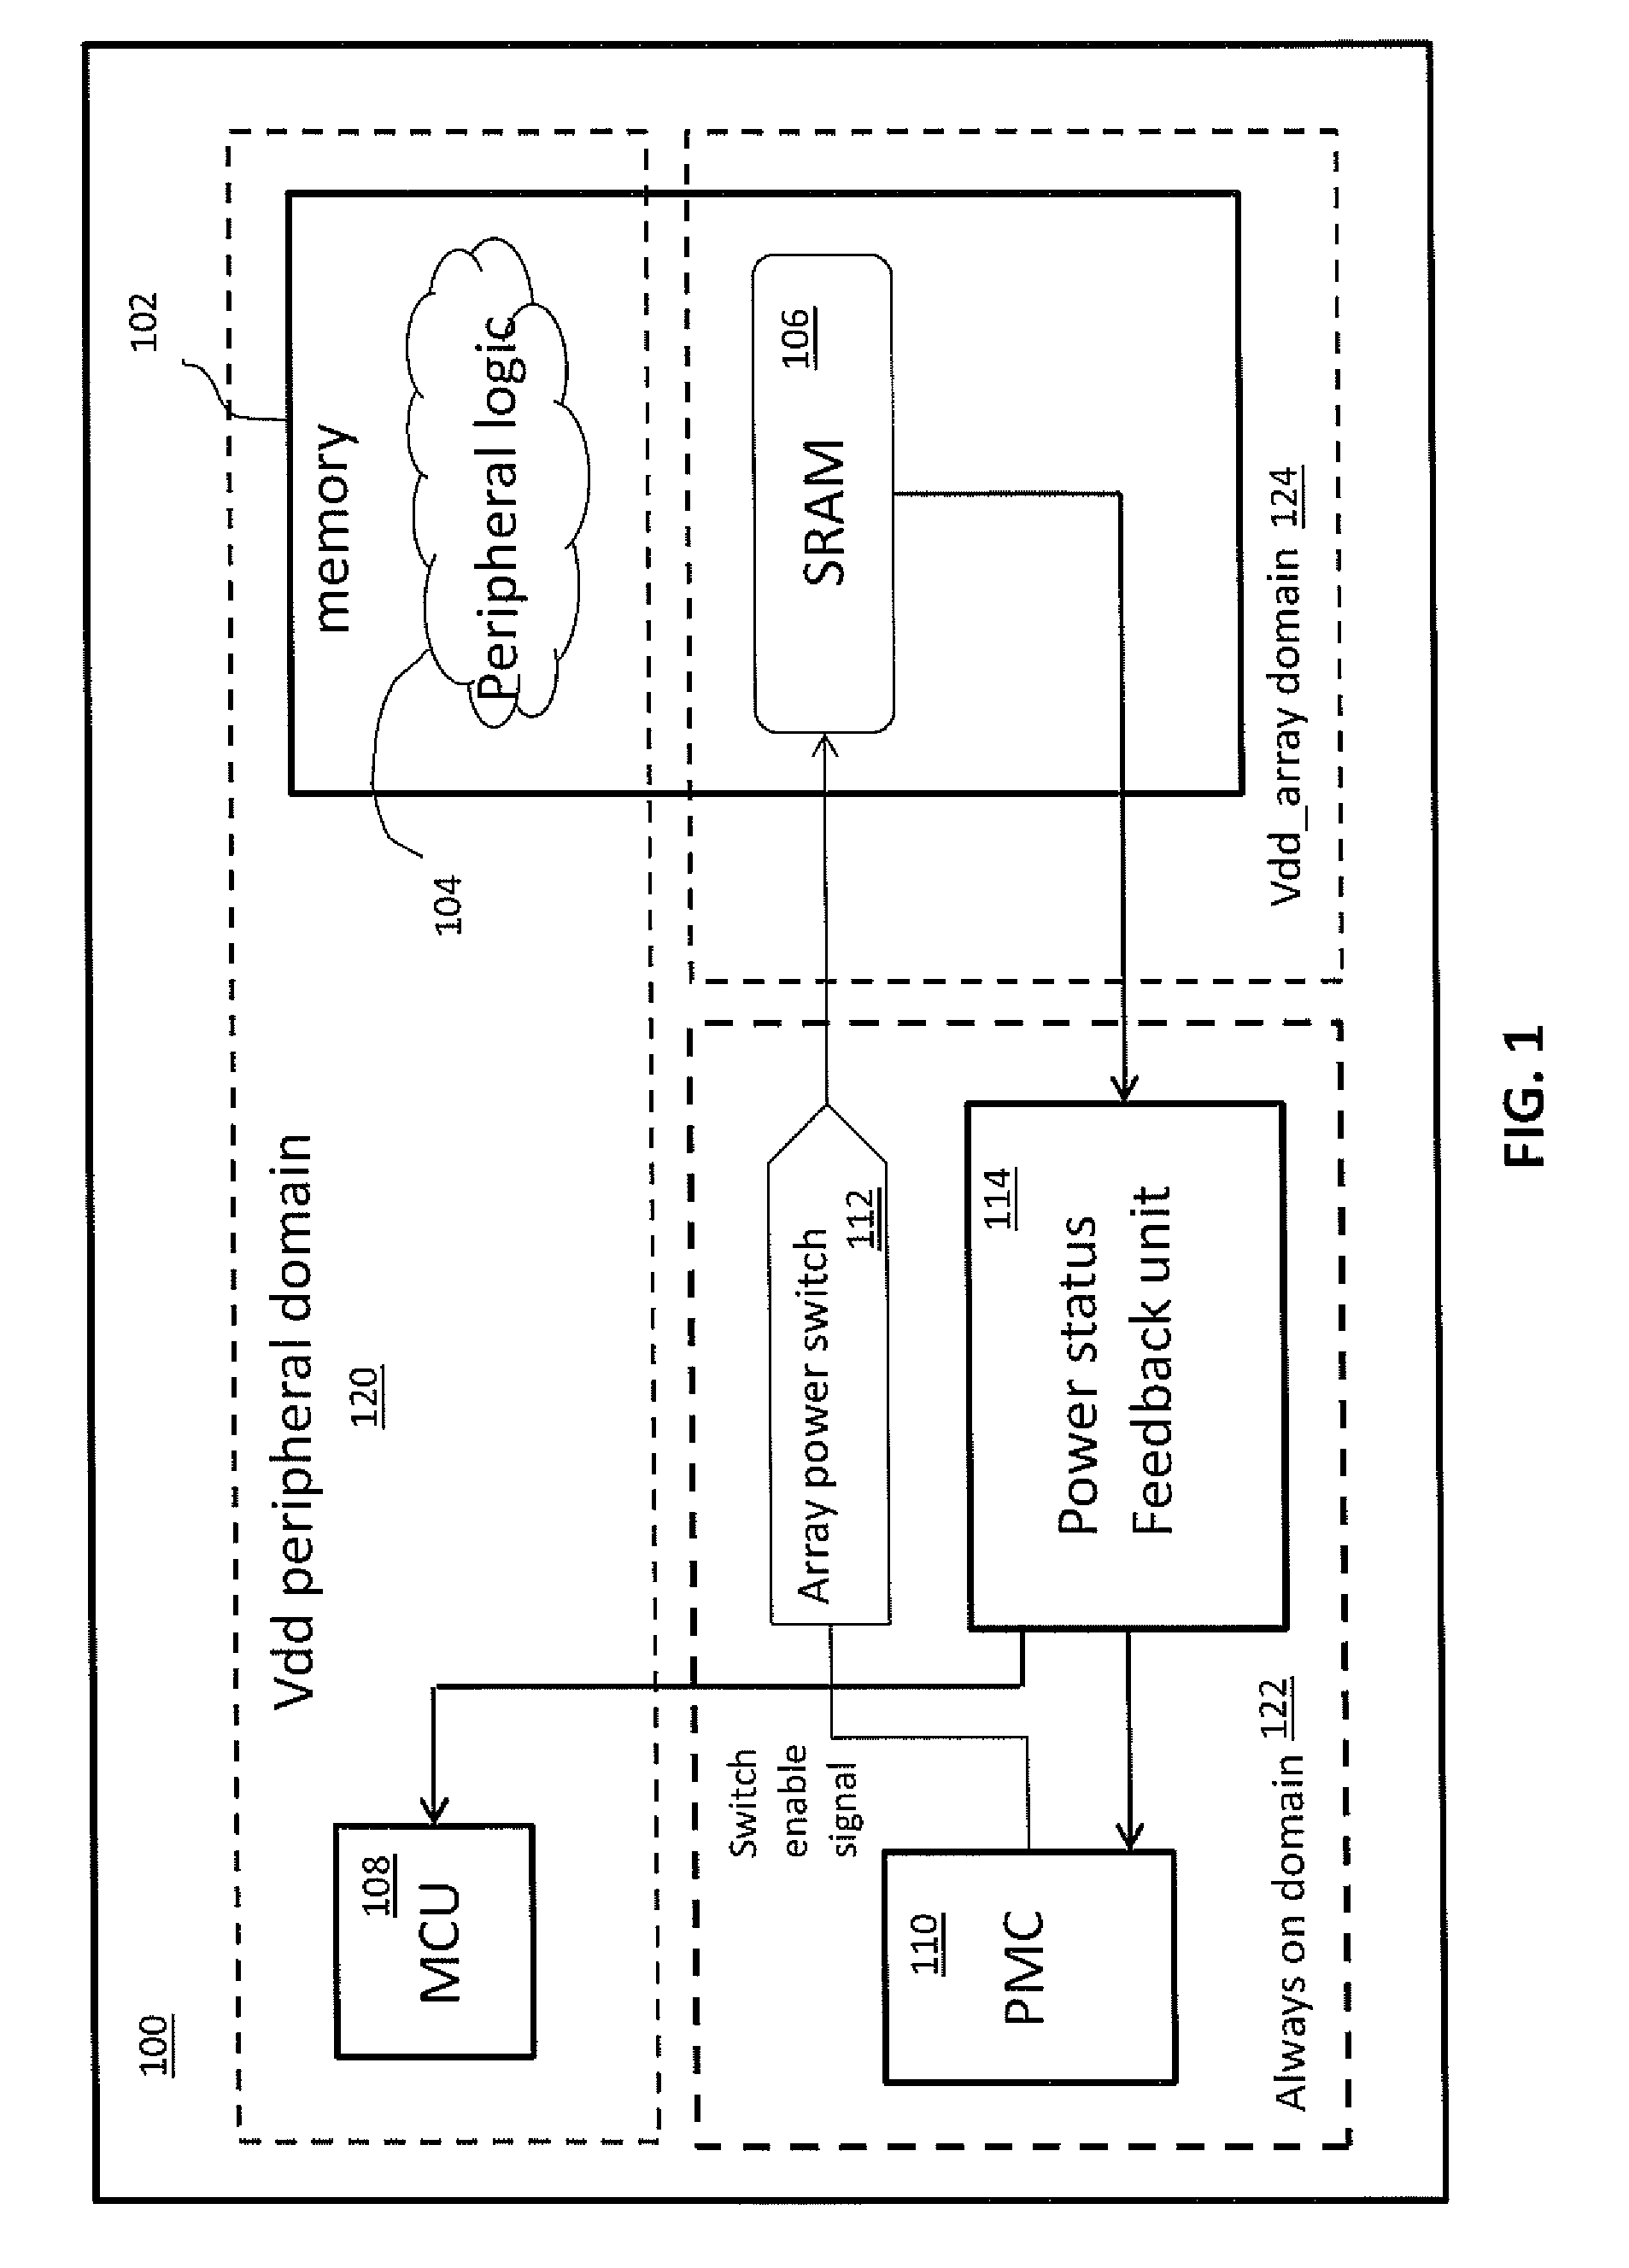 Performance based power management of a memory and a data storage system using the memory